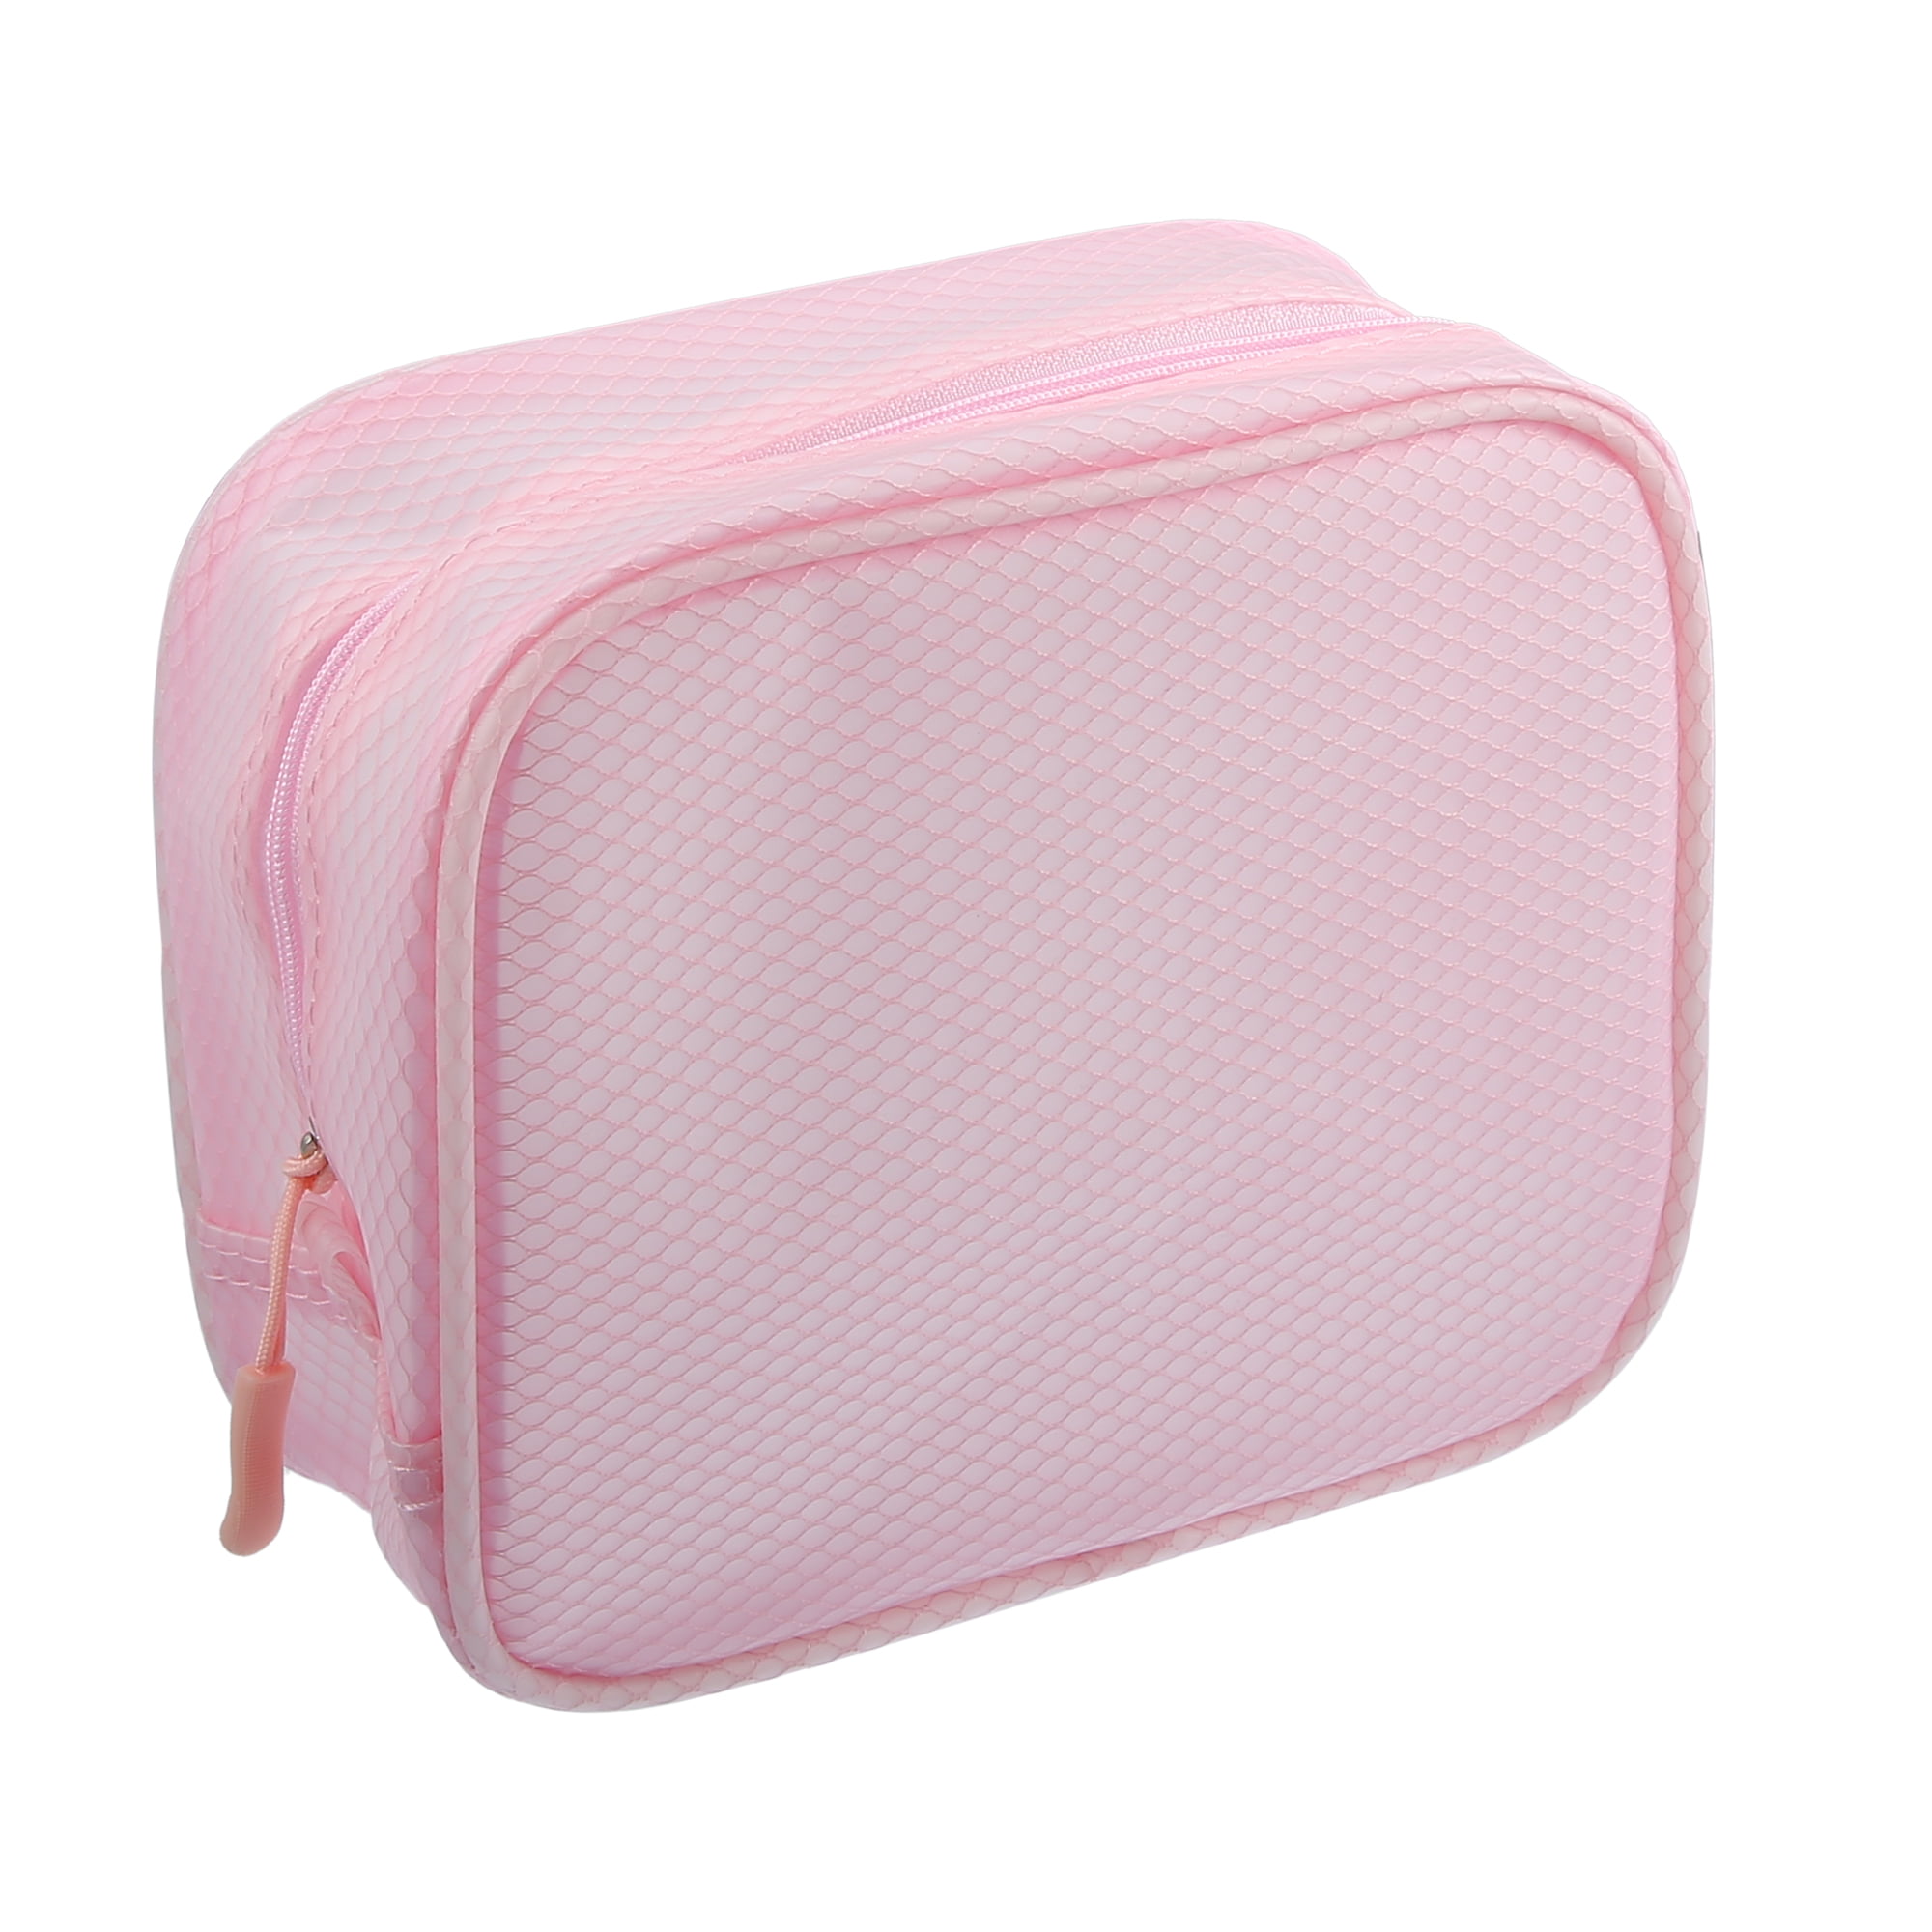 Mini Toiletry Bag Case Small Bag Storage Makeup Coin pouch